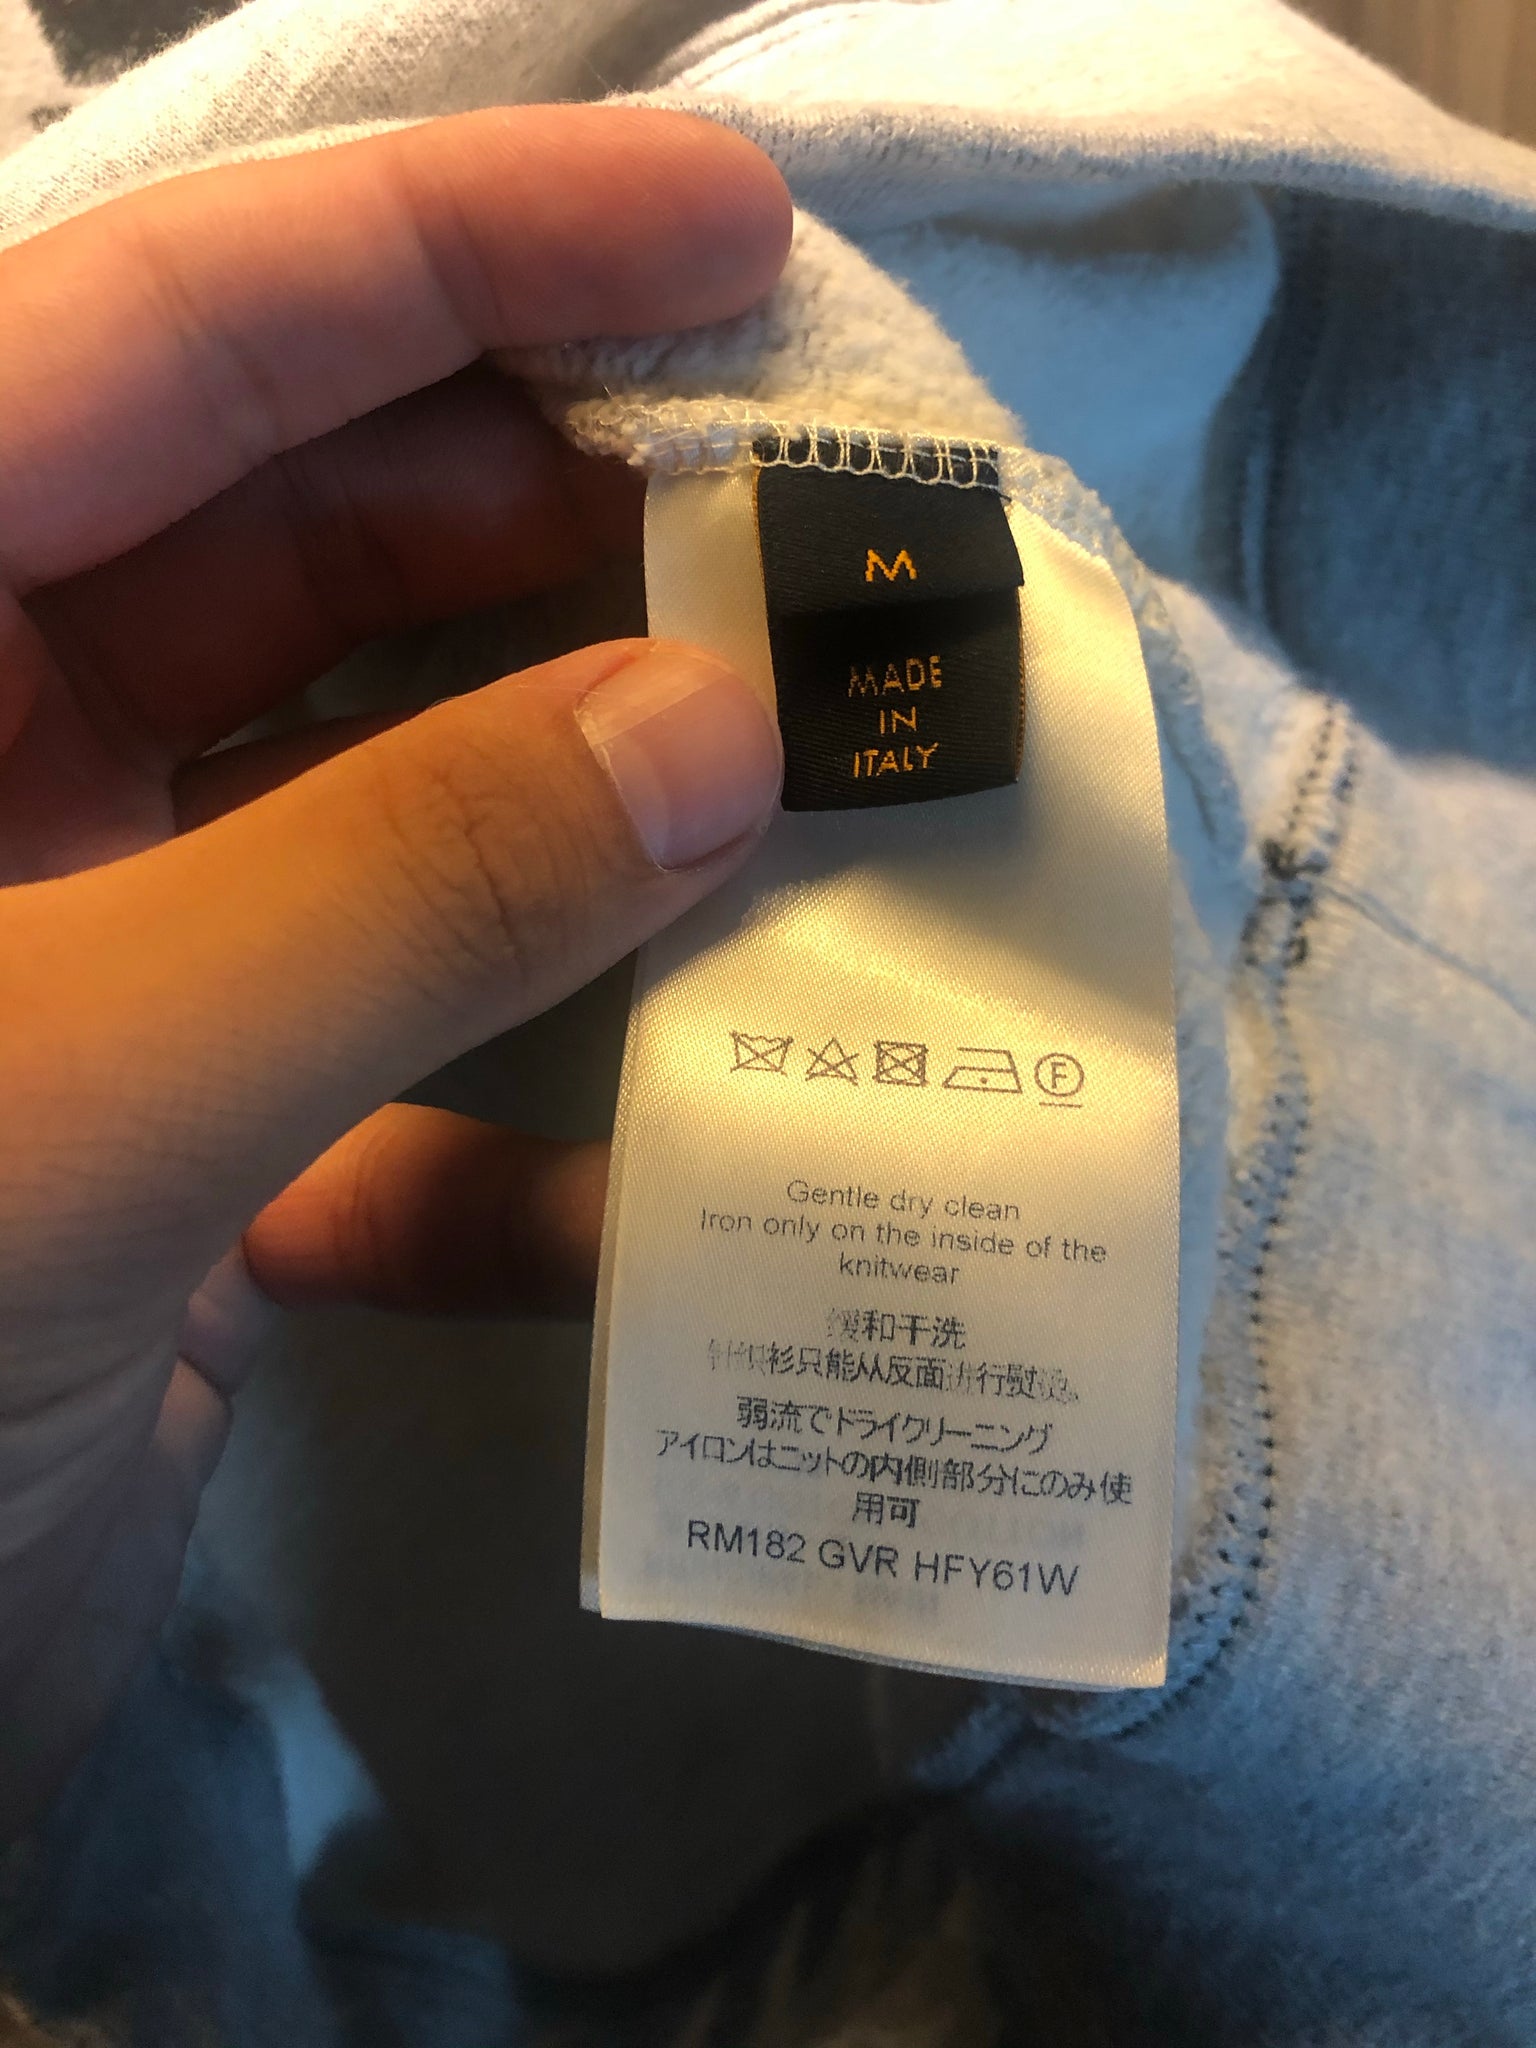 Louis Vuitton Peace and Love Sweater